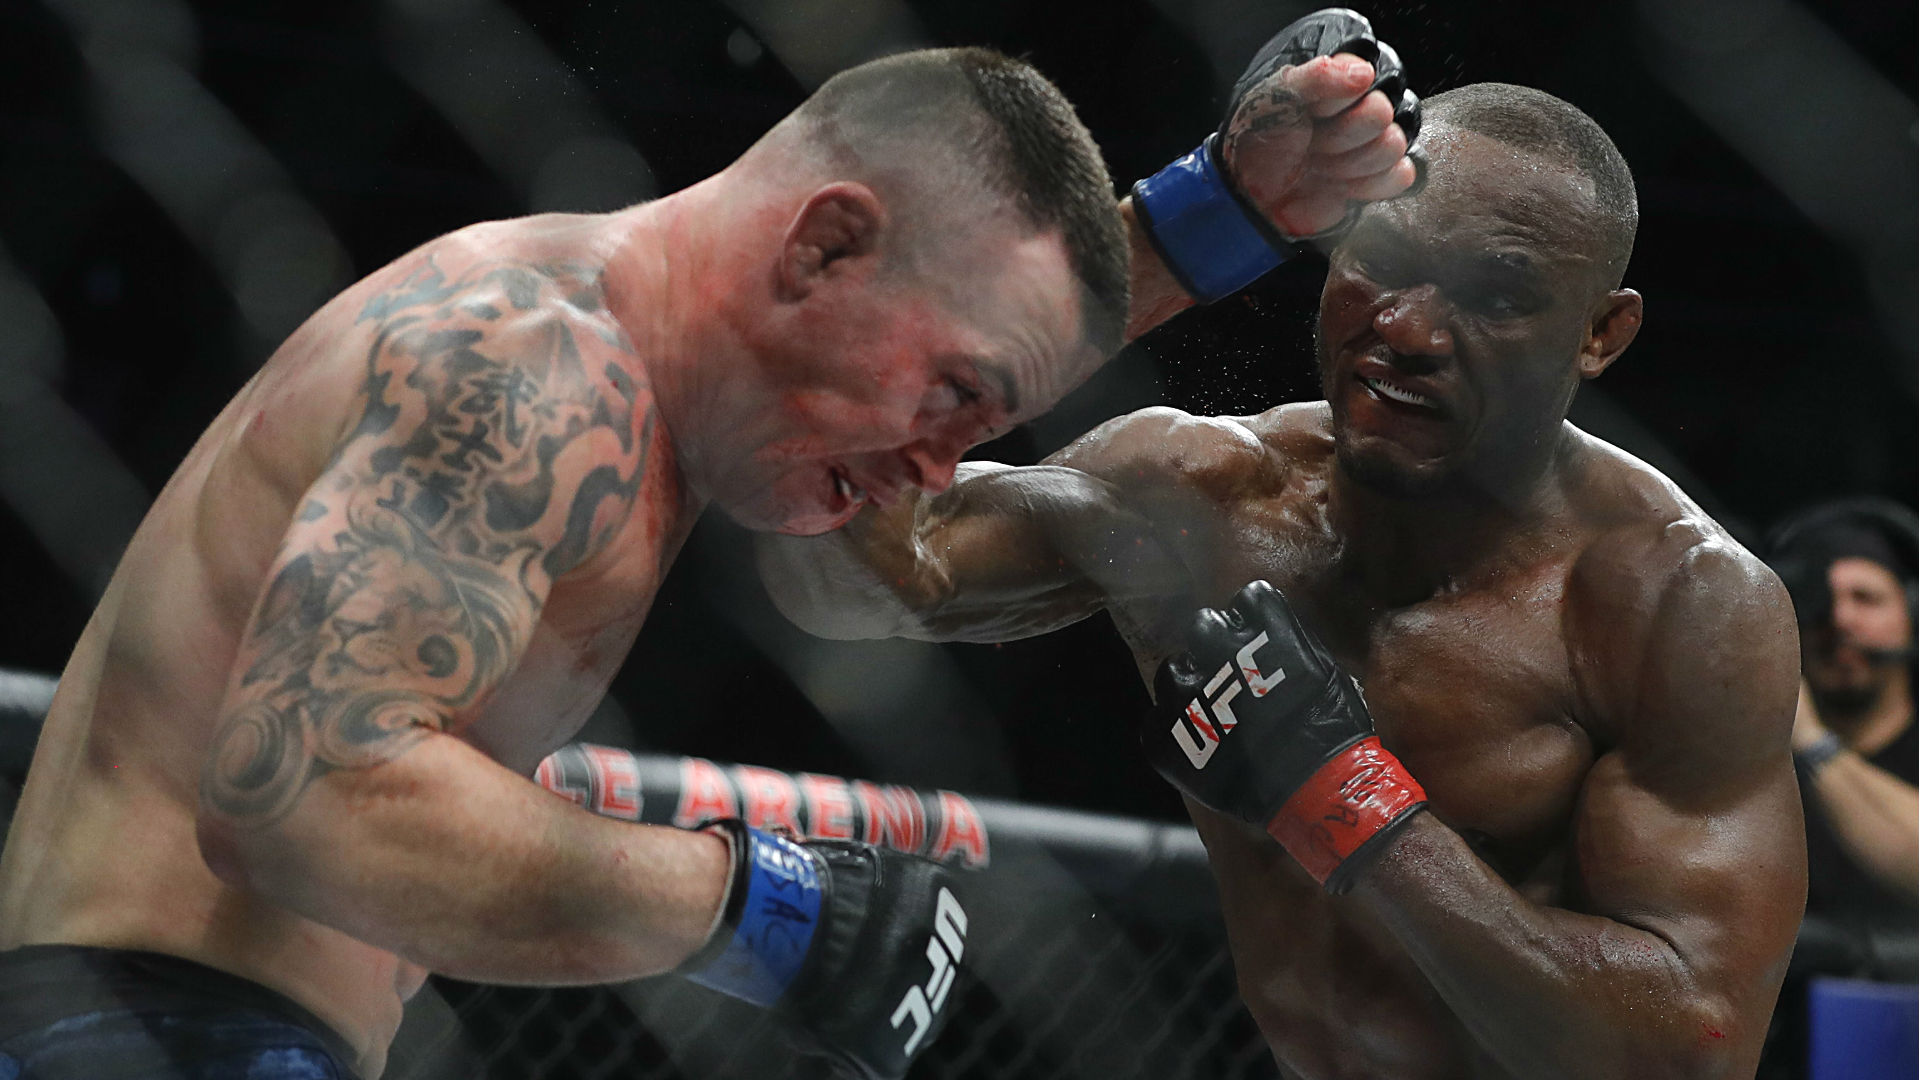 UFC 245 results: Kamaru Usman finishes Colby Covington to remain